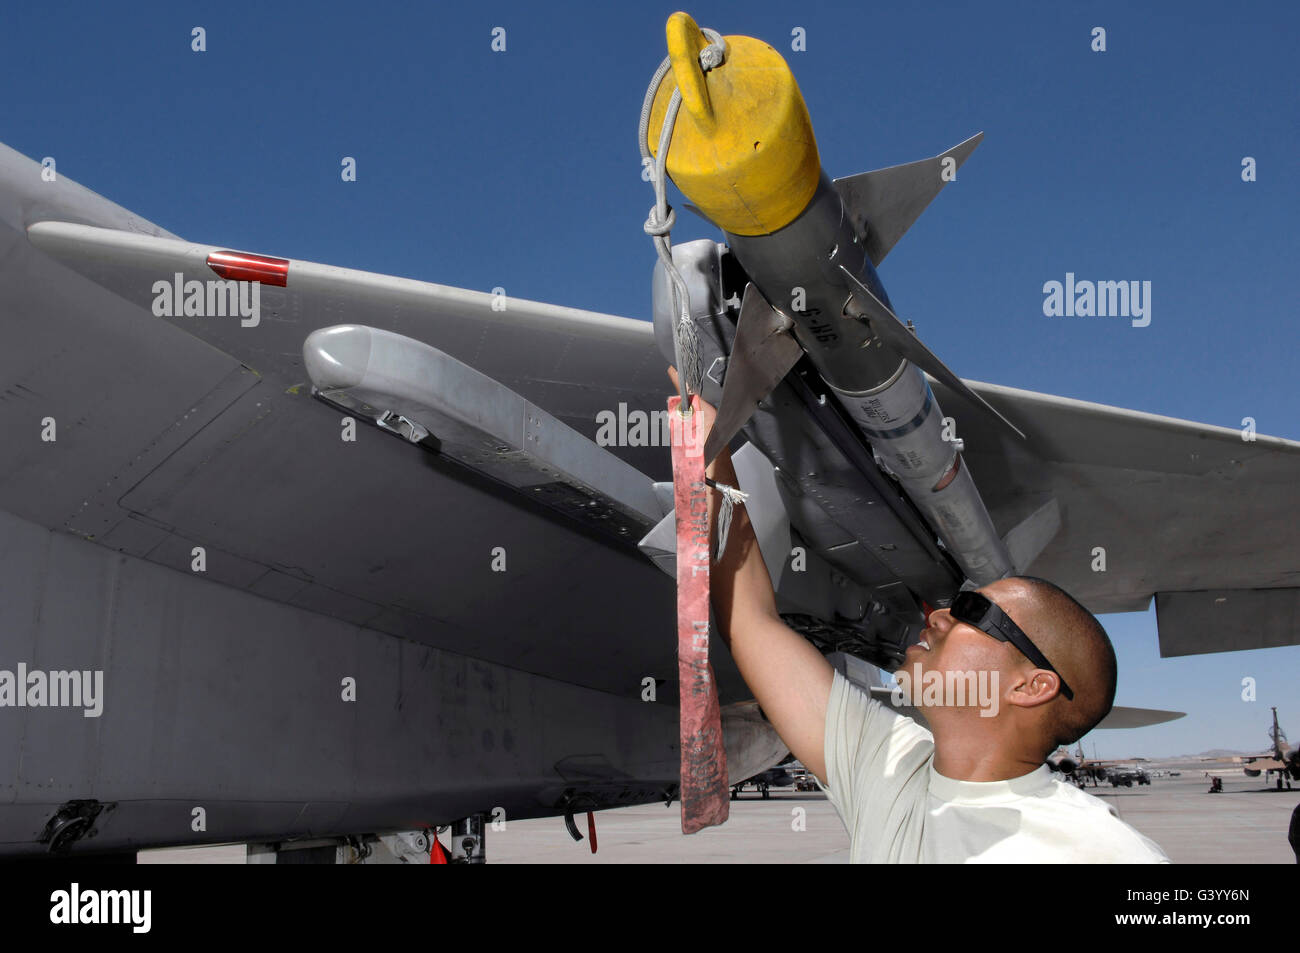 A weapons expediter inspects an AIM-9 missile on a F-15 aircraft. Stock Photo